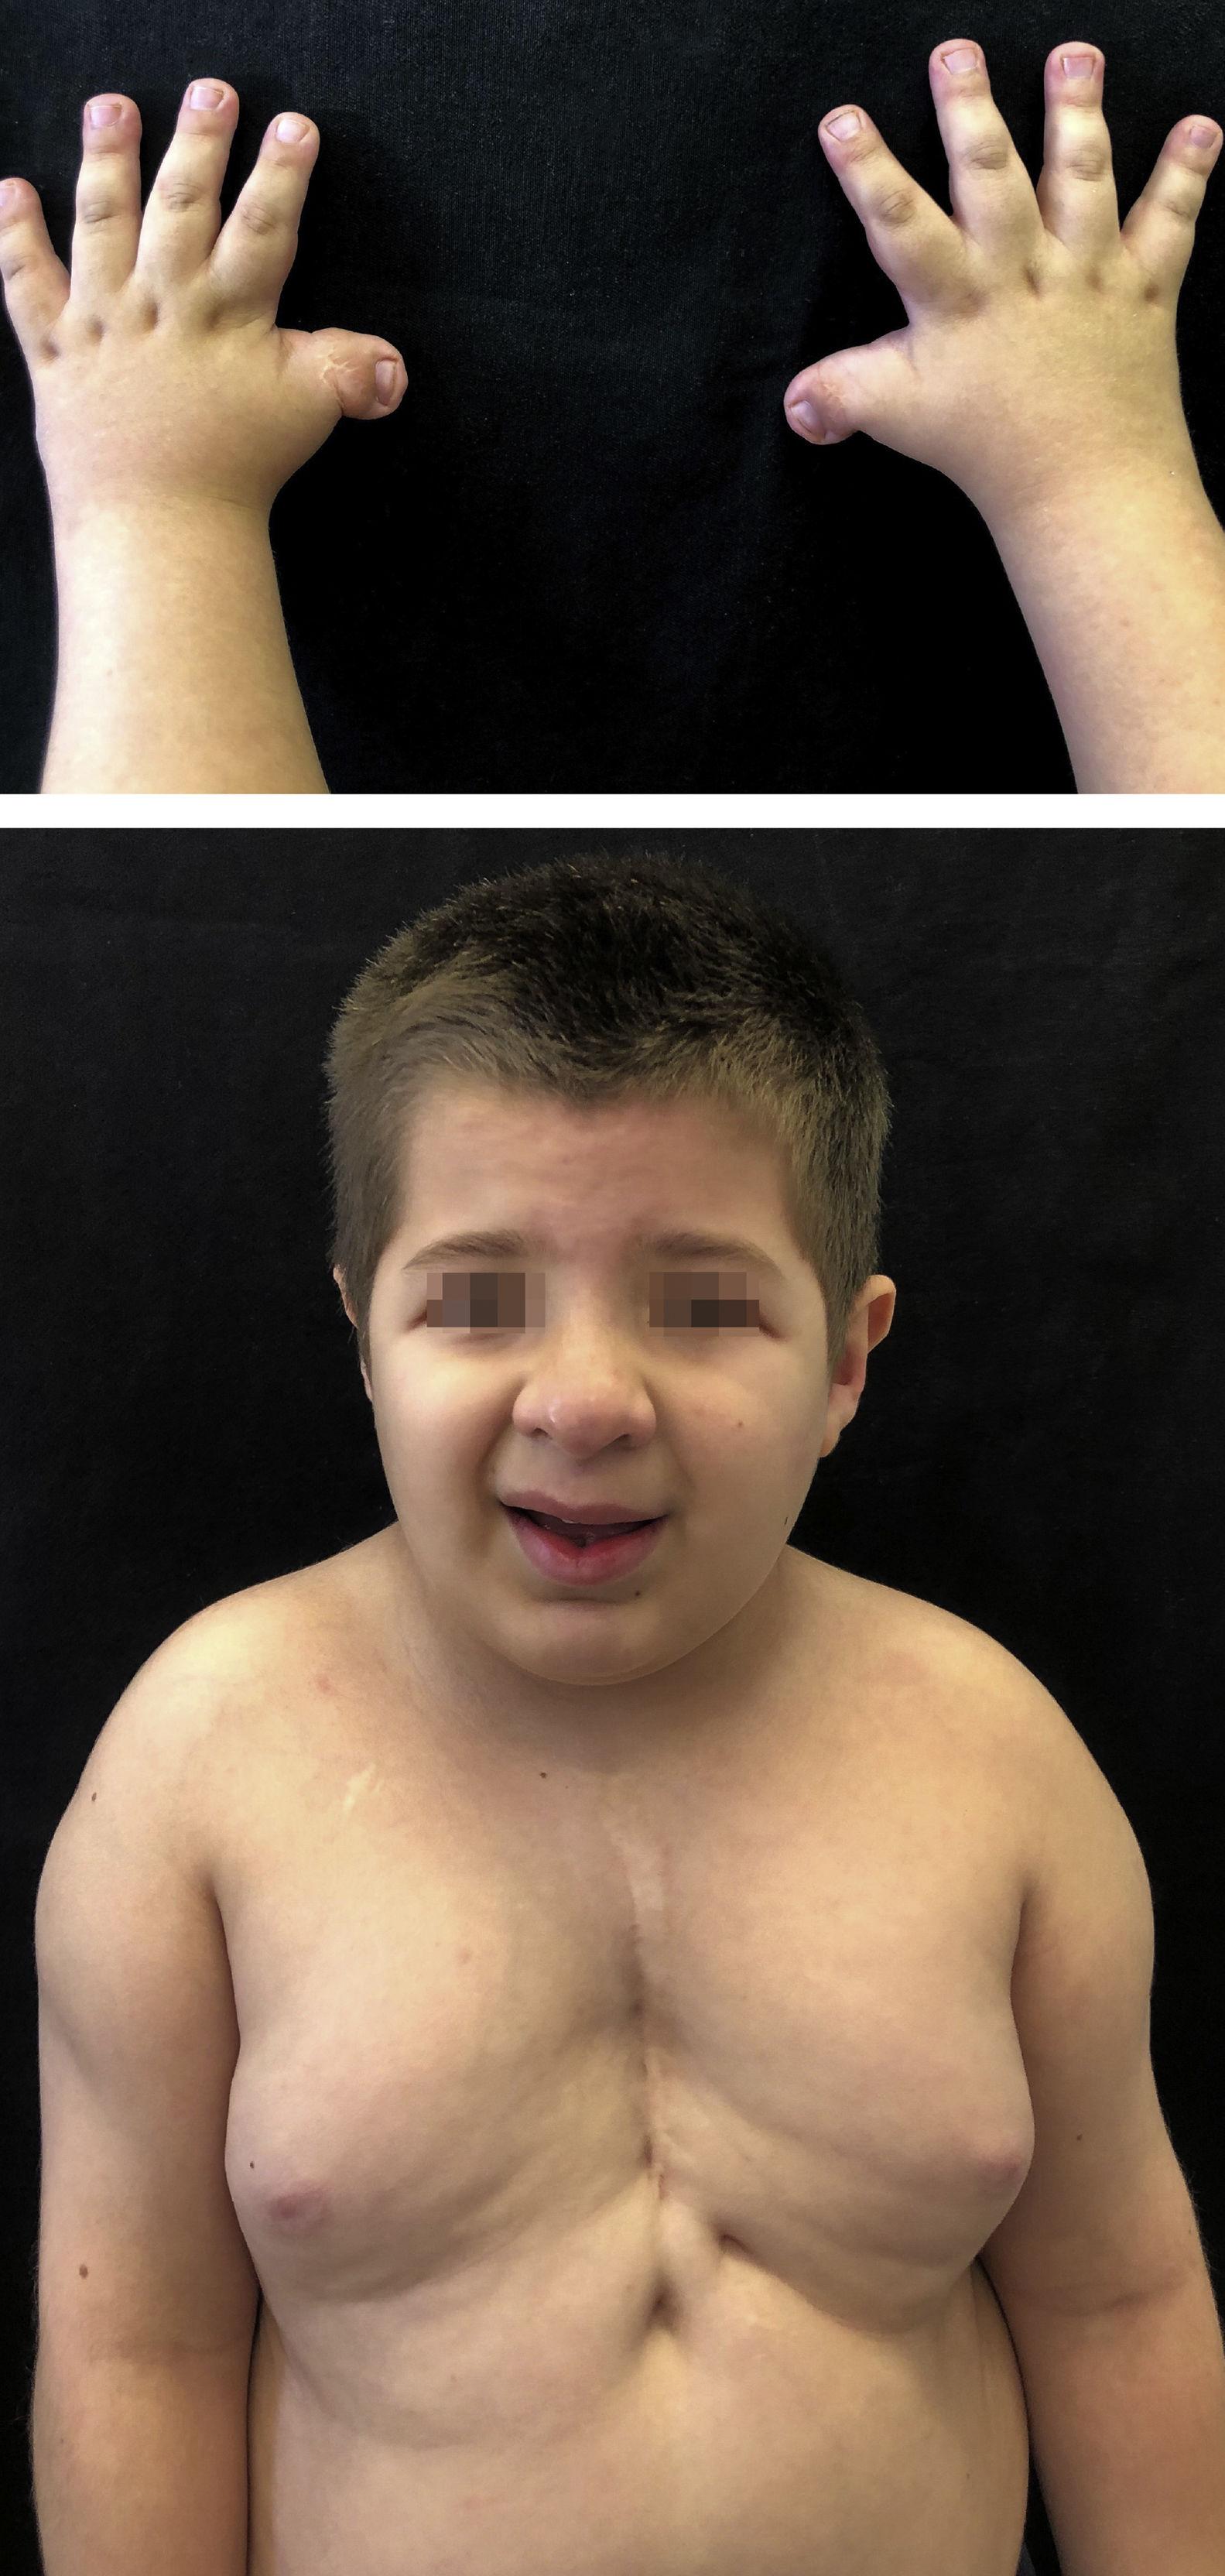 Rubinstein Syndrome - an overview